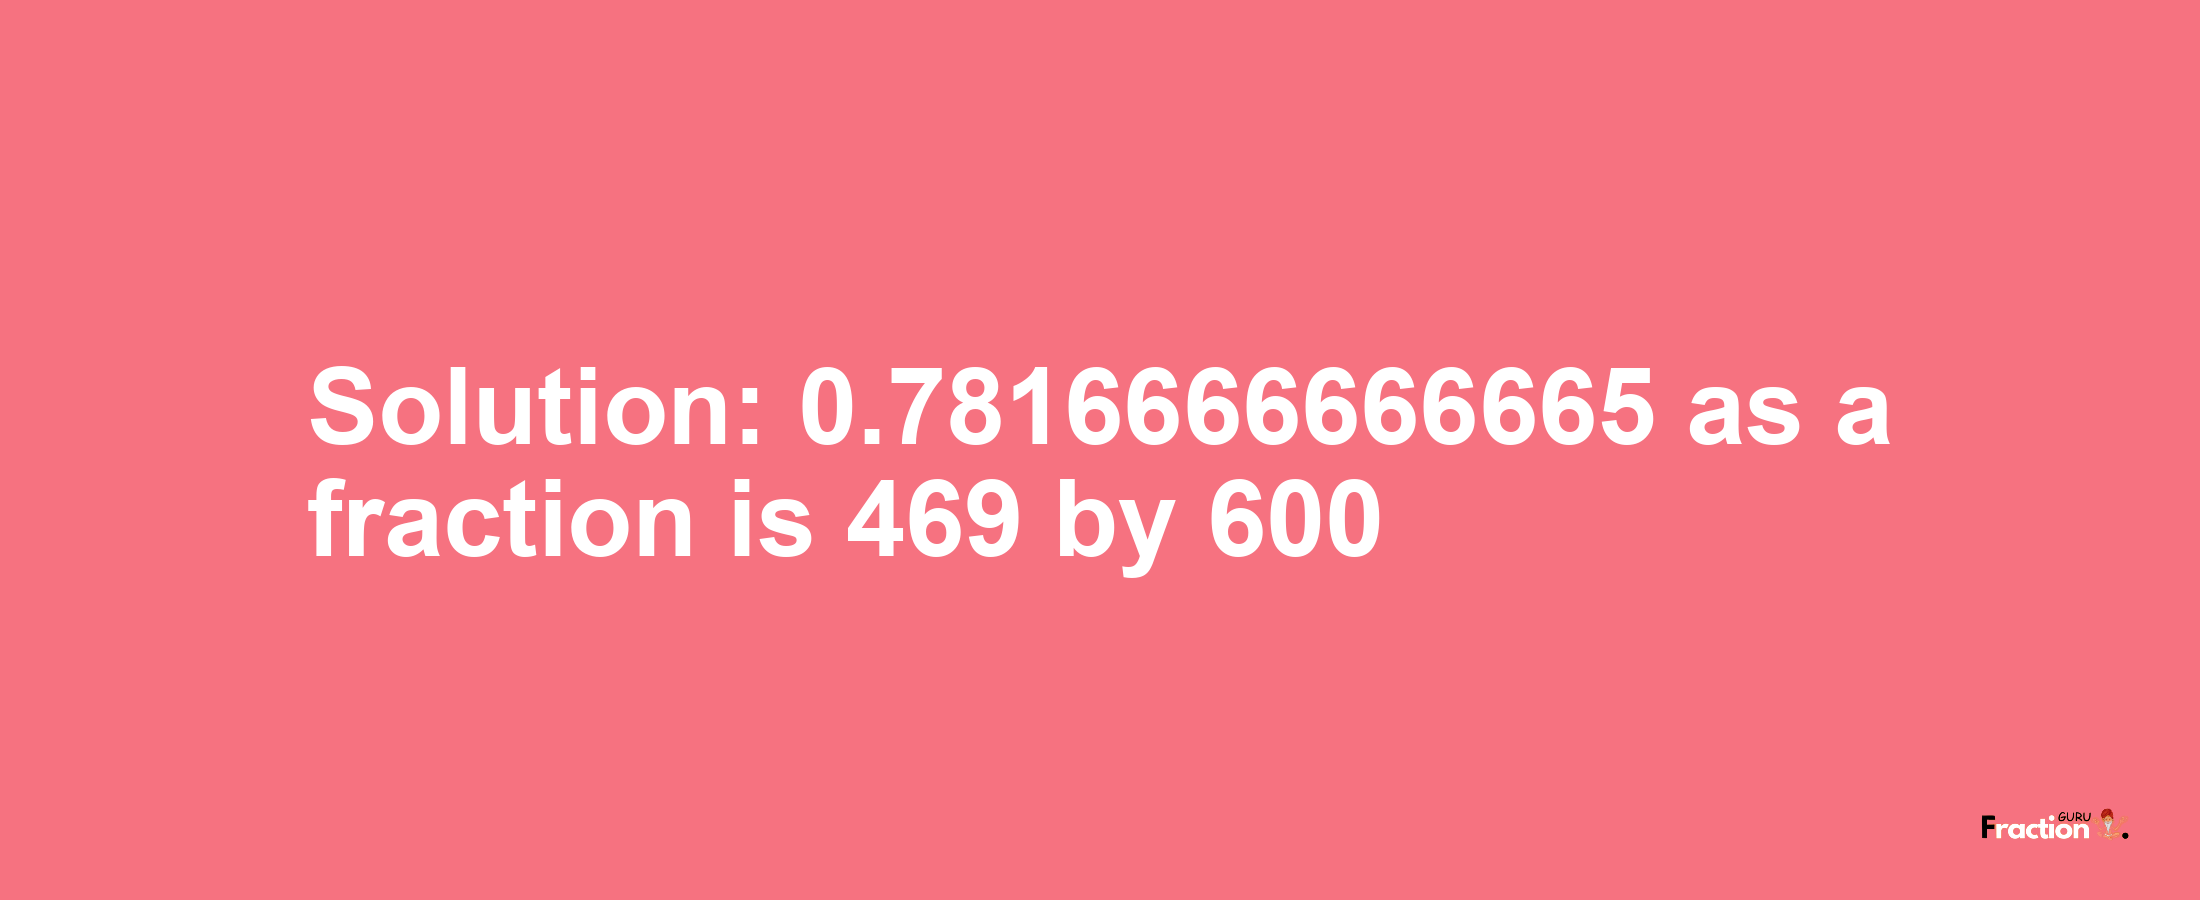 Solution:0.7816666666665 as a fraction is 469/600